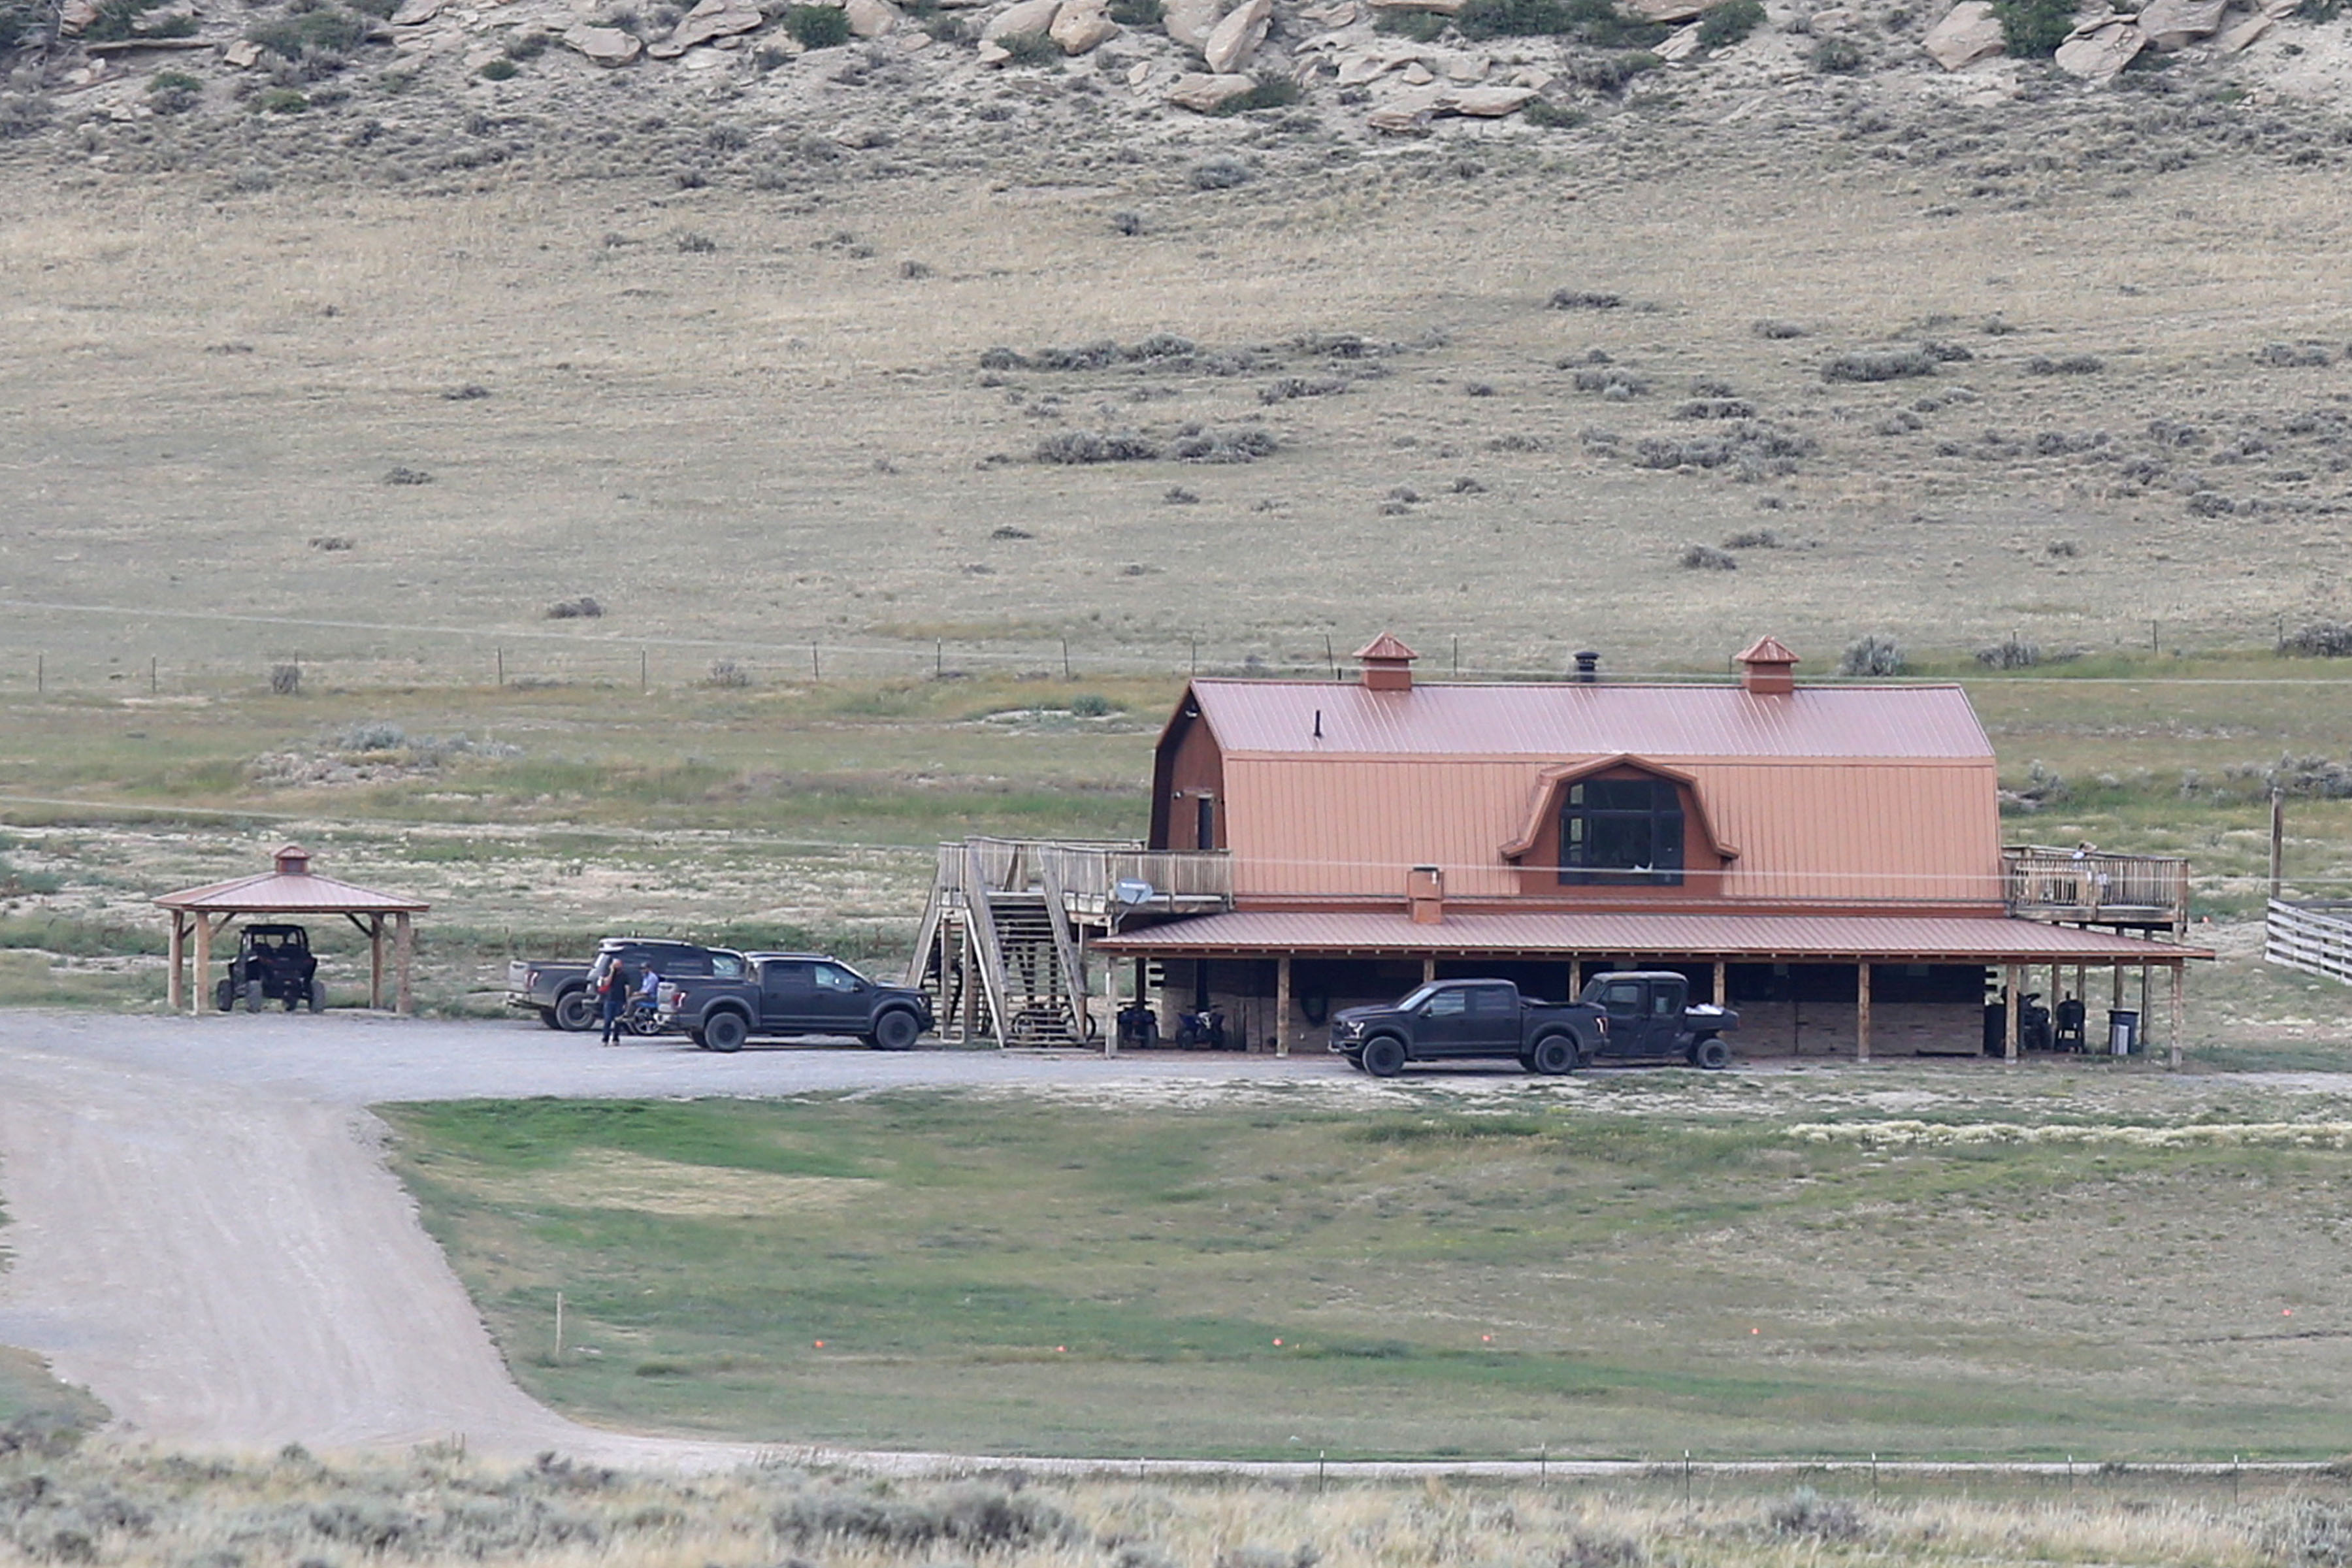 Kanye is tied up in several other loans, including one with his Wyoming property